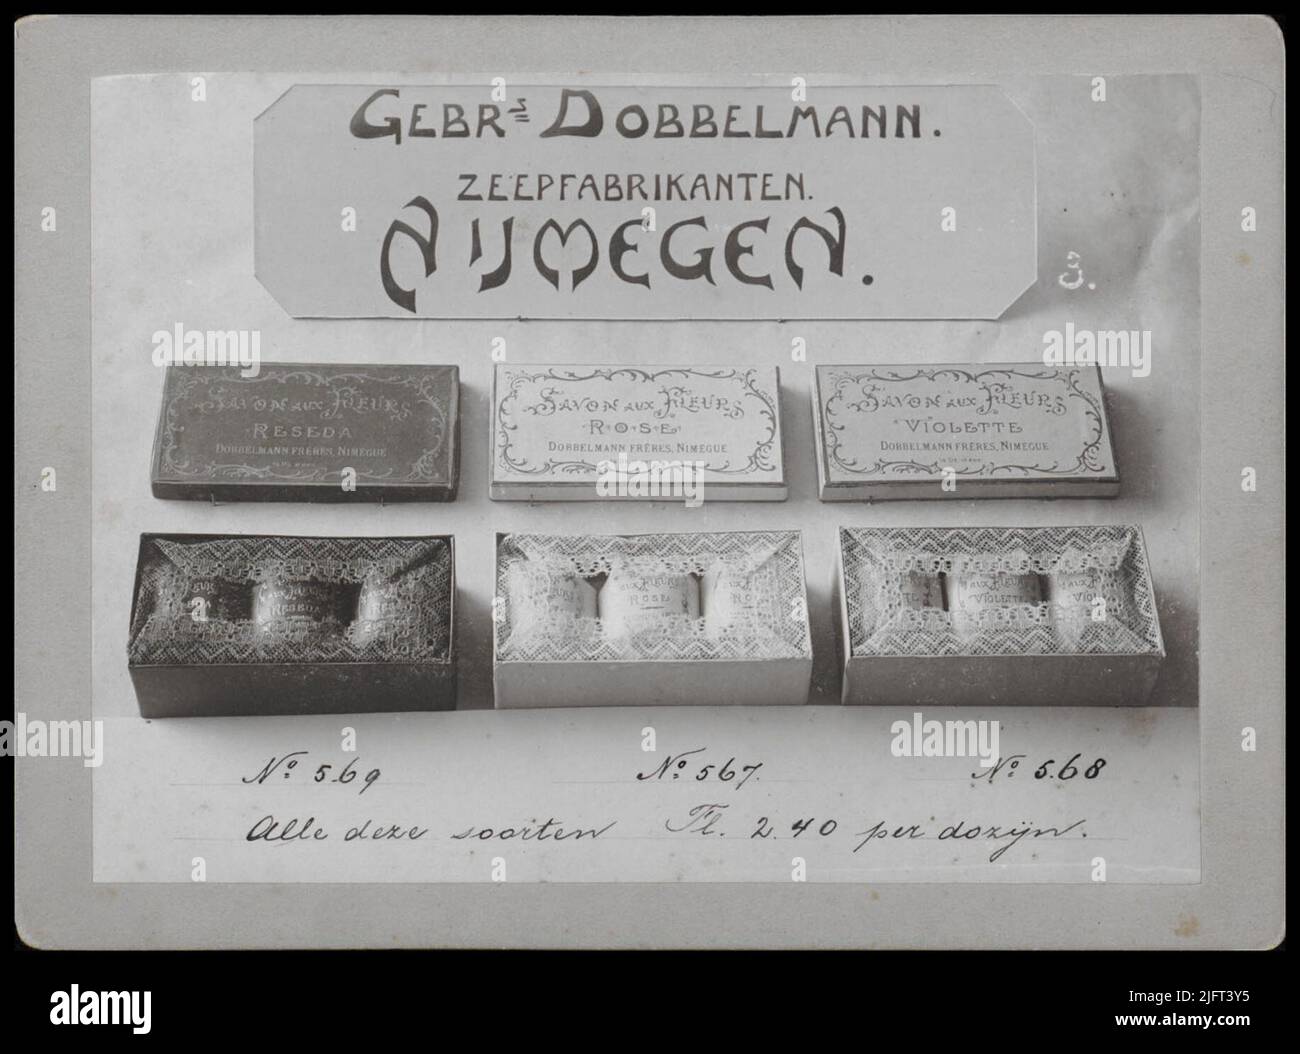 Representative card no. 3. Photo on cardboard. With songs and prizes. 'Gebrs. Dobbelmann. soap manufacturers. Nijmegen.' On the back are the labels of 'Savon Aux Fleurs Reseda', Savon Aux Fleurs Rose 'and' Savon Aux Fleurs Violette '. Stock Photo